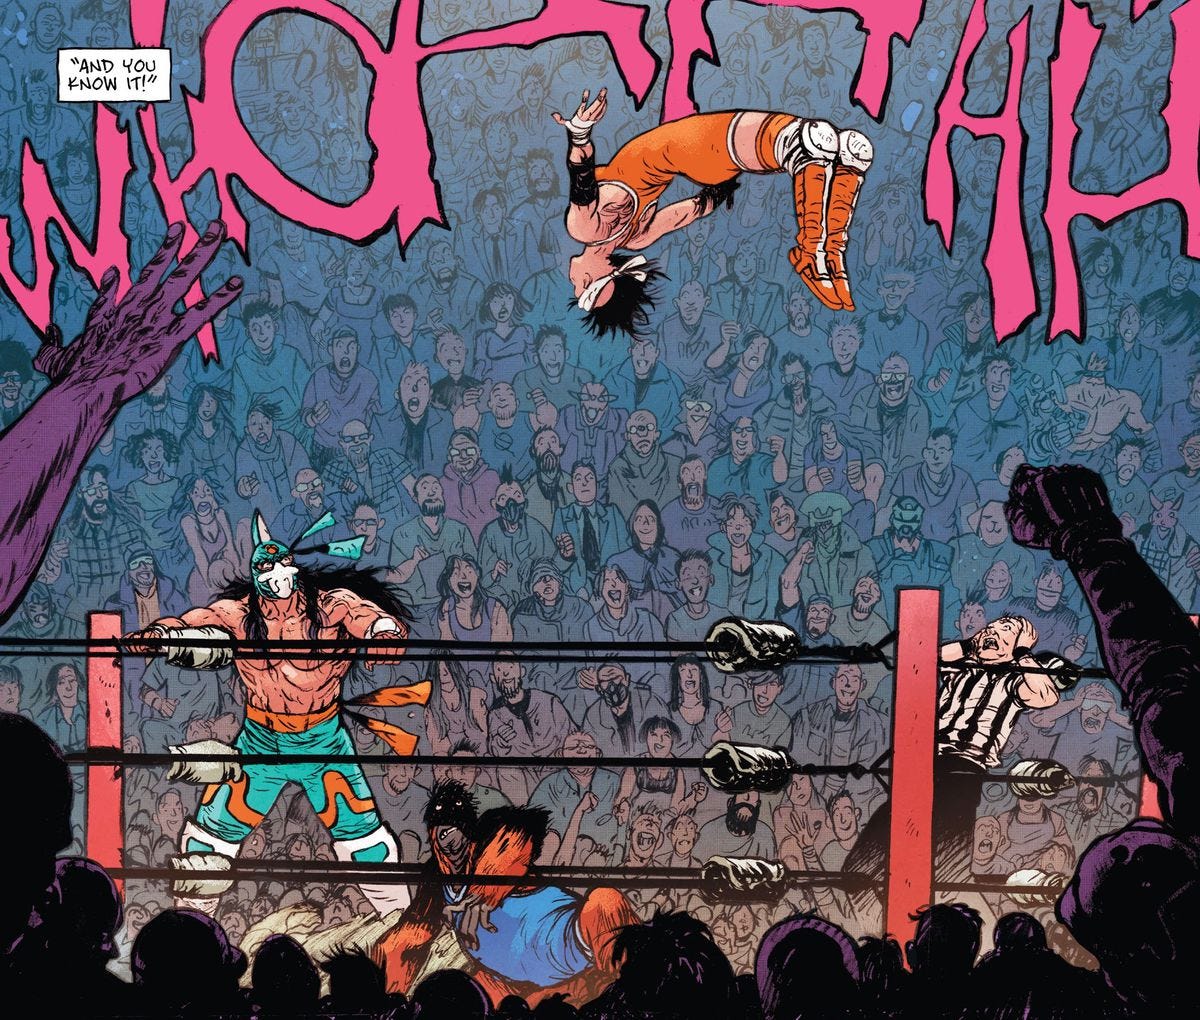 Lona Steelrose launches off the corner into her signature flying move, hanging suspended upside down in the air above the wrestling ring. Her opponent, a sentient orangutan, lies fearful in her shadow. The ref is gripping his head with both hands. The crowd is going absolutely insane. In Do A Power Bomb.